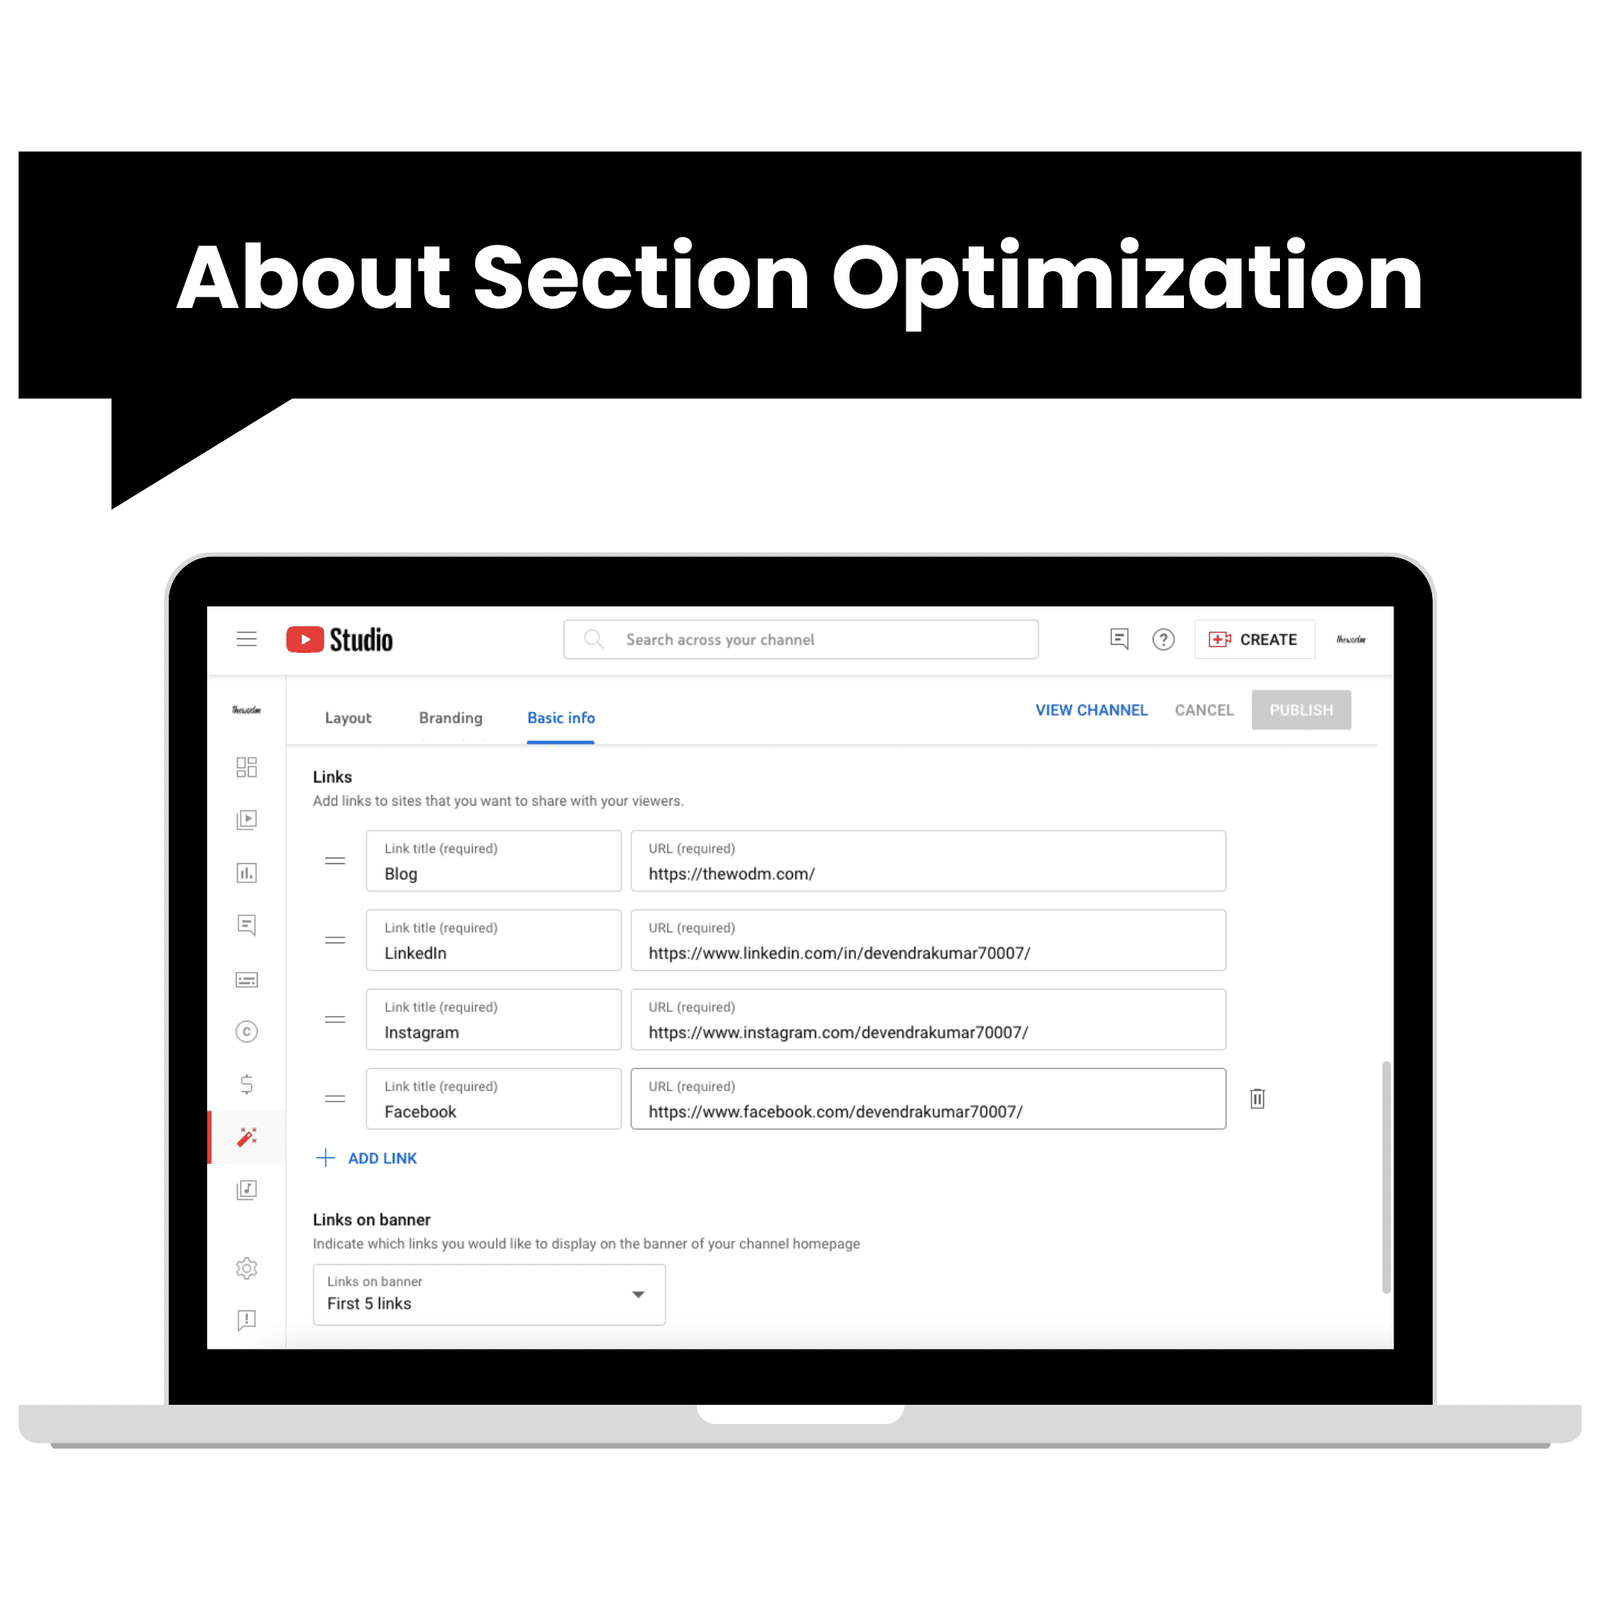 About Section Optimization